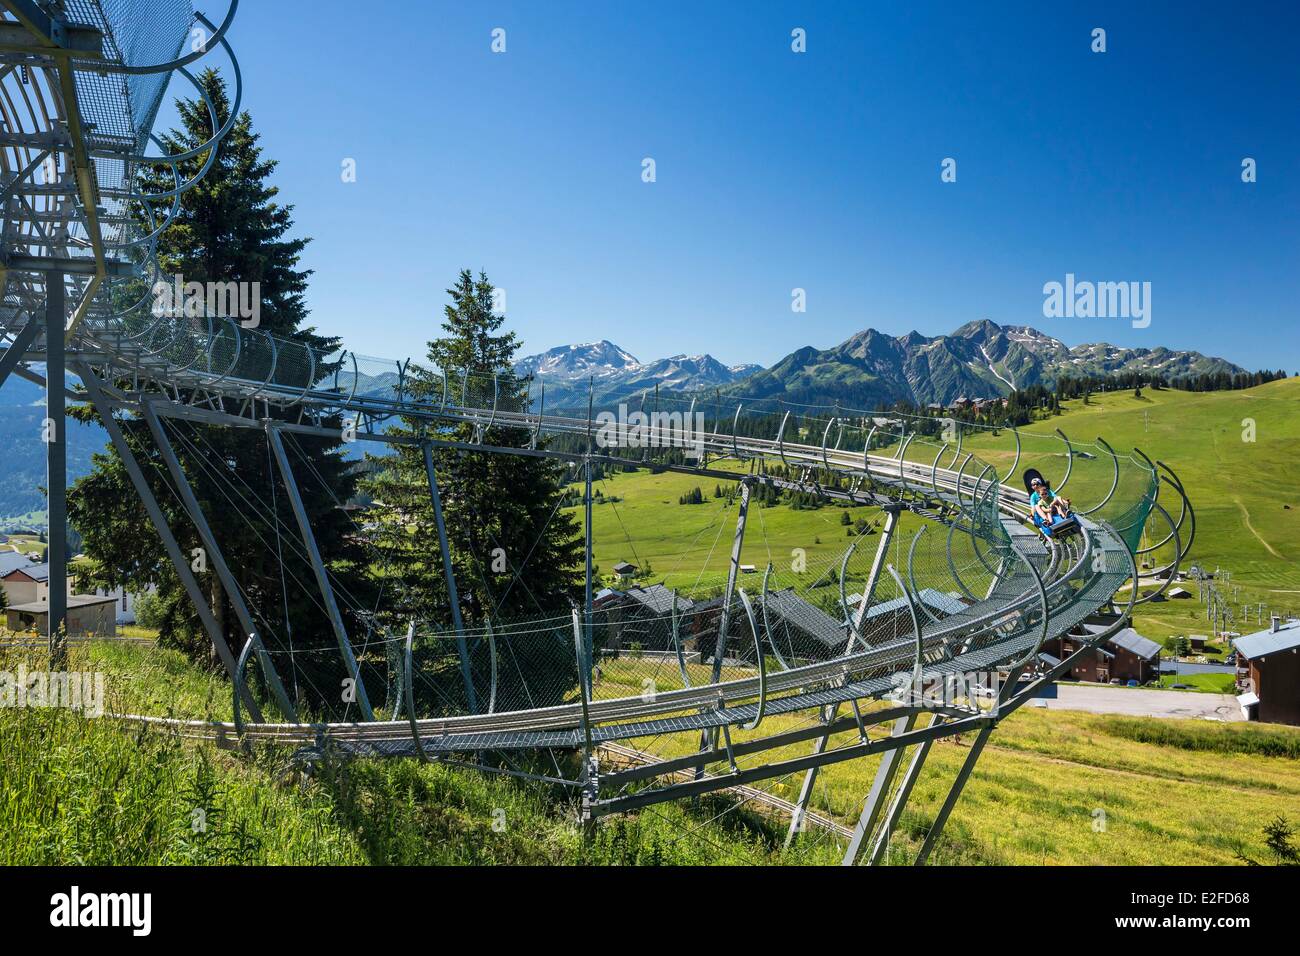 France, Savoie, Beaufortin massif, Les Saisies, sled on rail or moutain twister Stock Photo